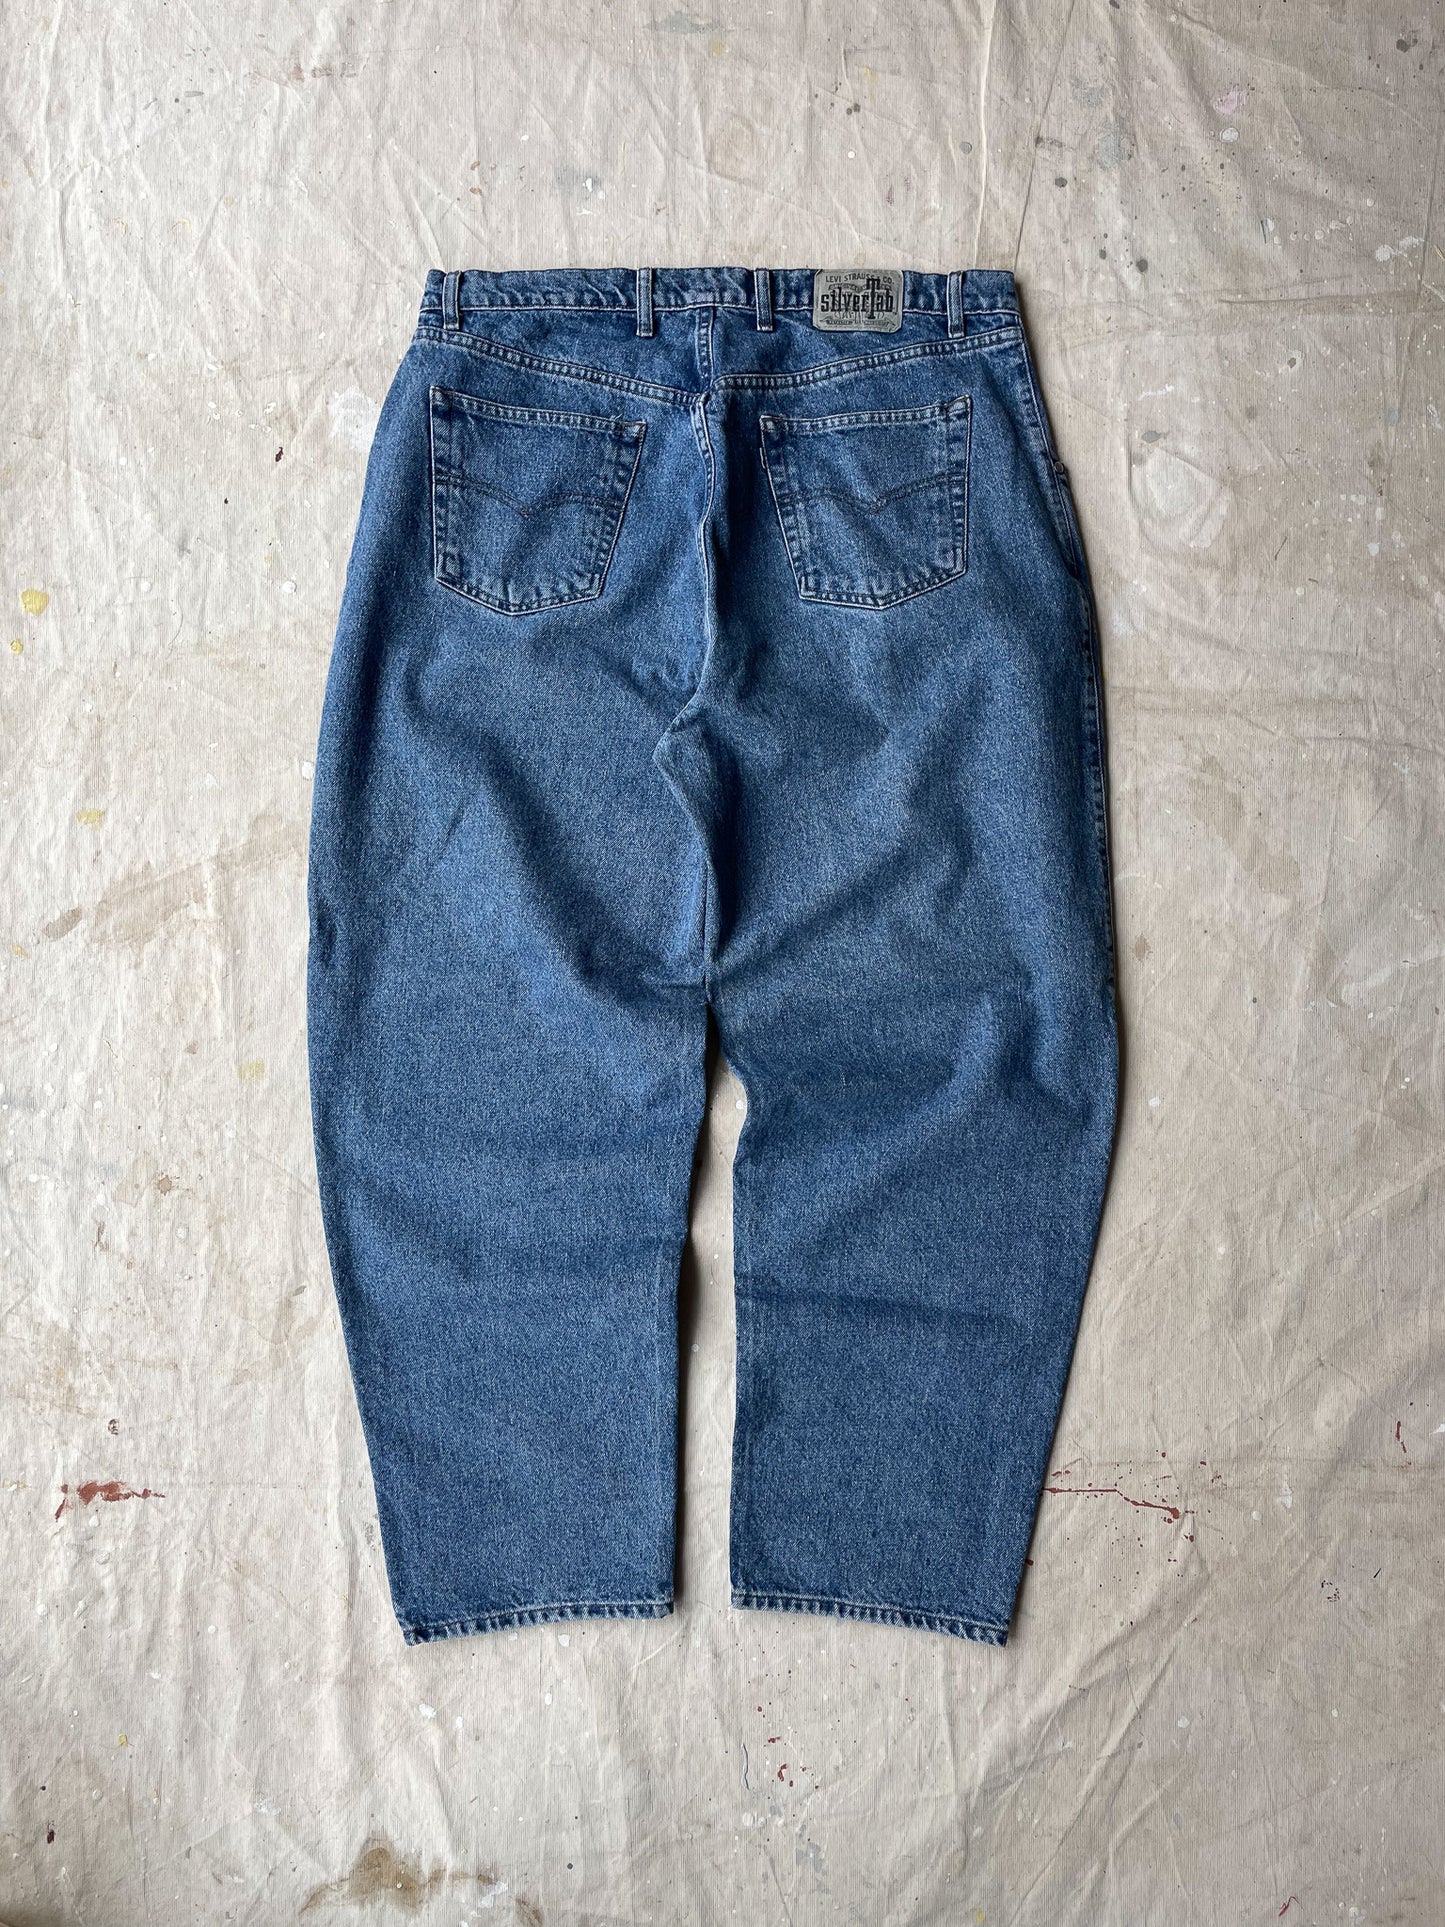 90's Levi's Silvertab Baggy Jeans—[38x30]